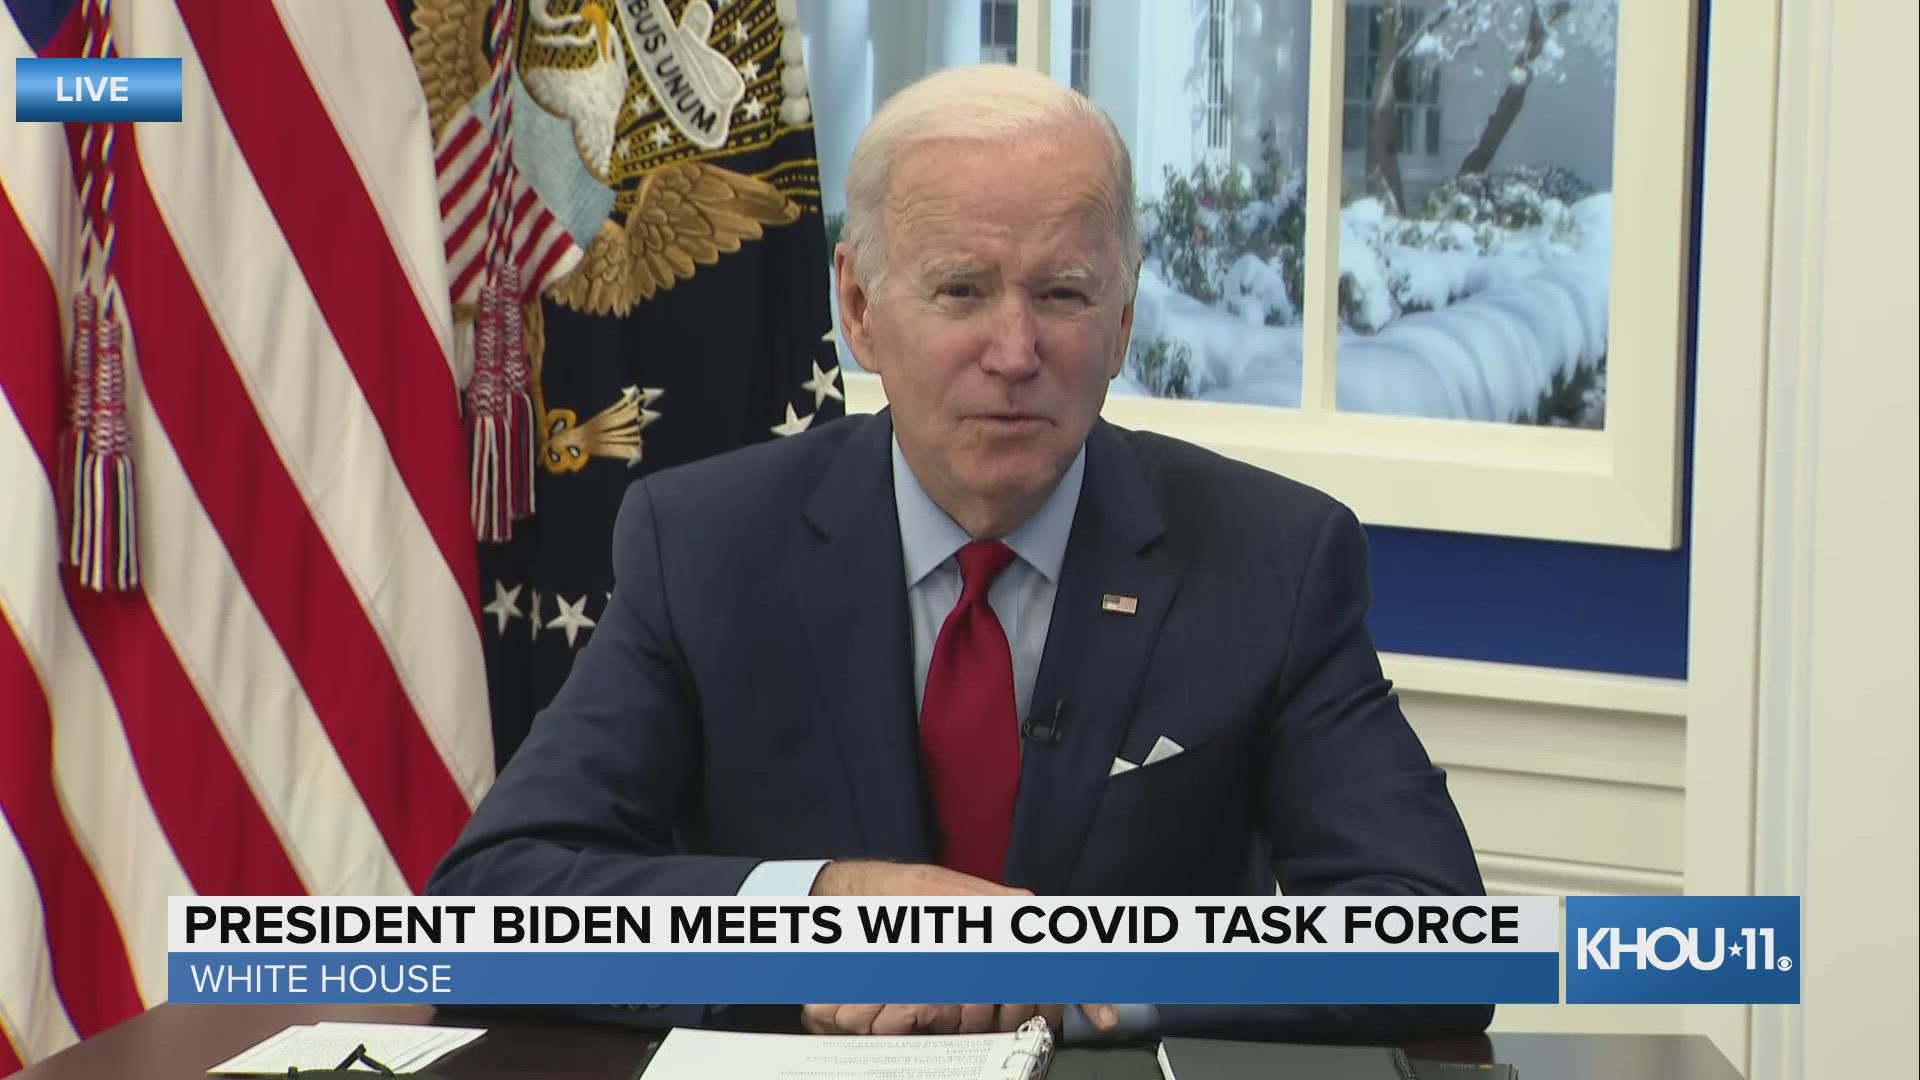 Before meeting with his COVID-19 task force, President Biden addressed the nation to speak about the surge in cases and what his office is doing to combat the spread